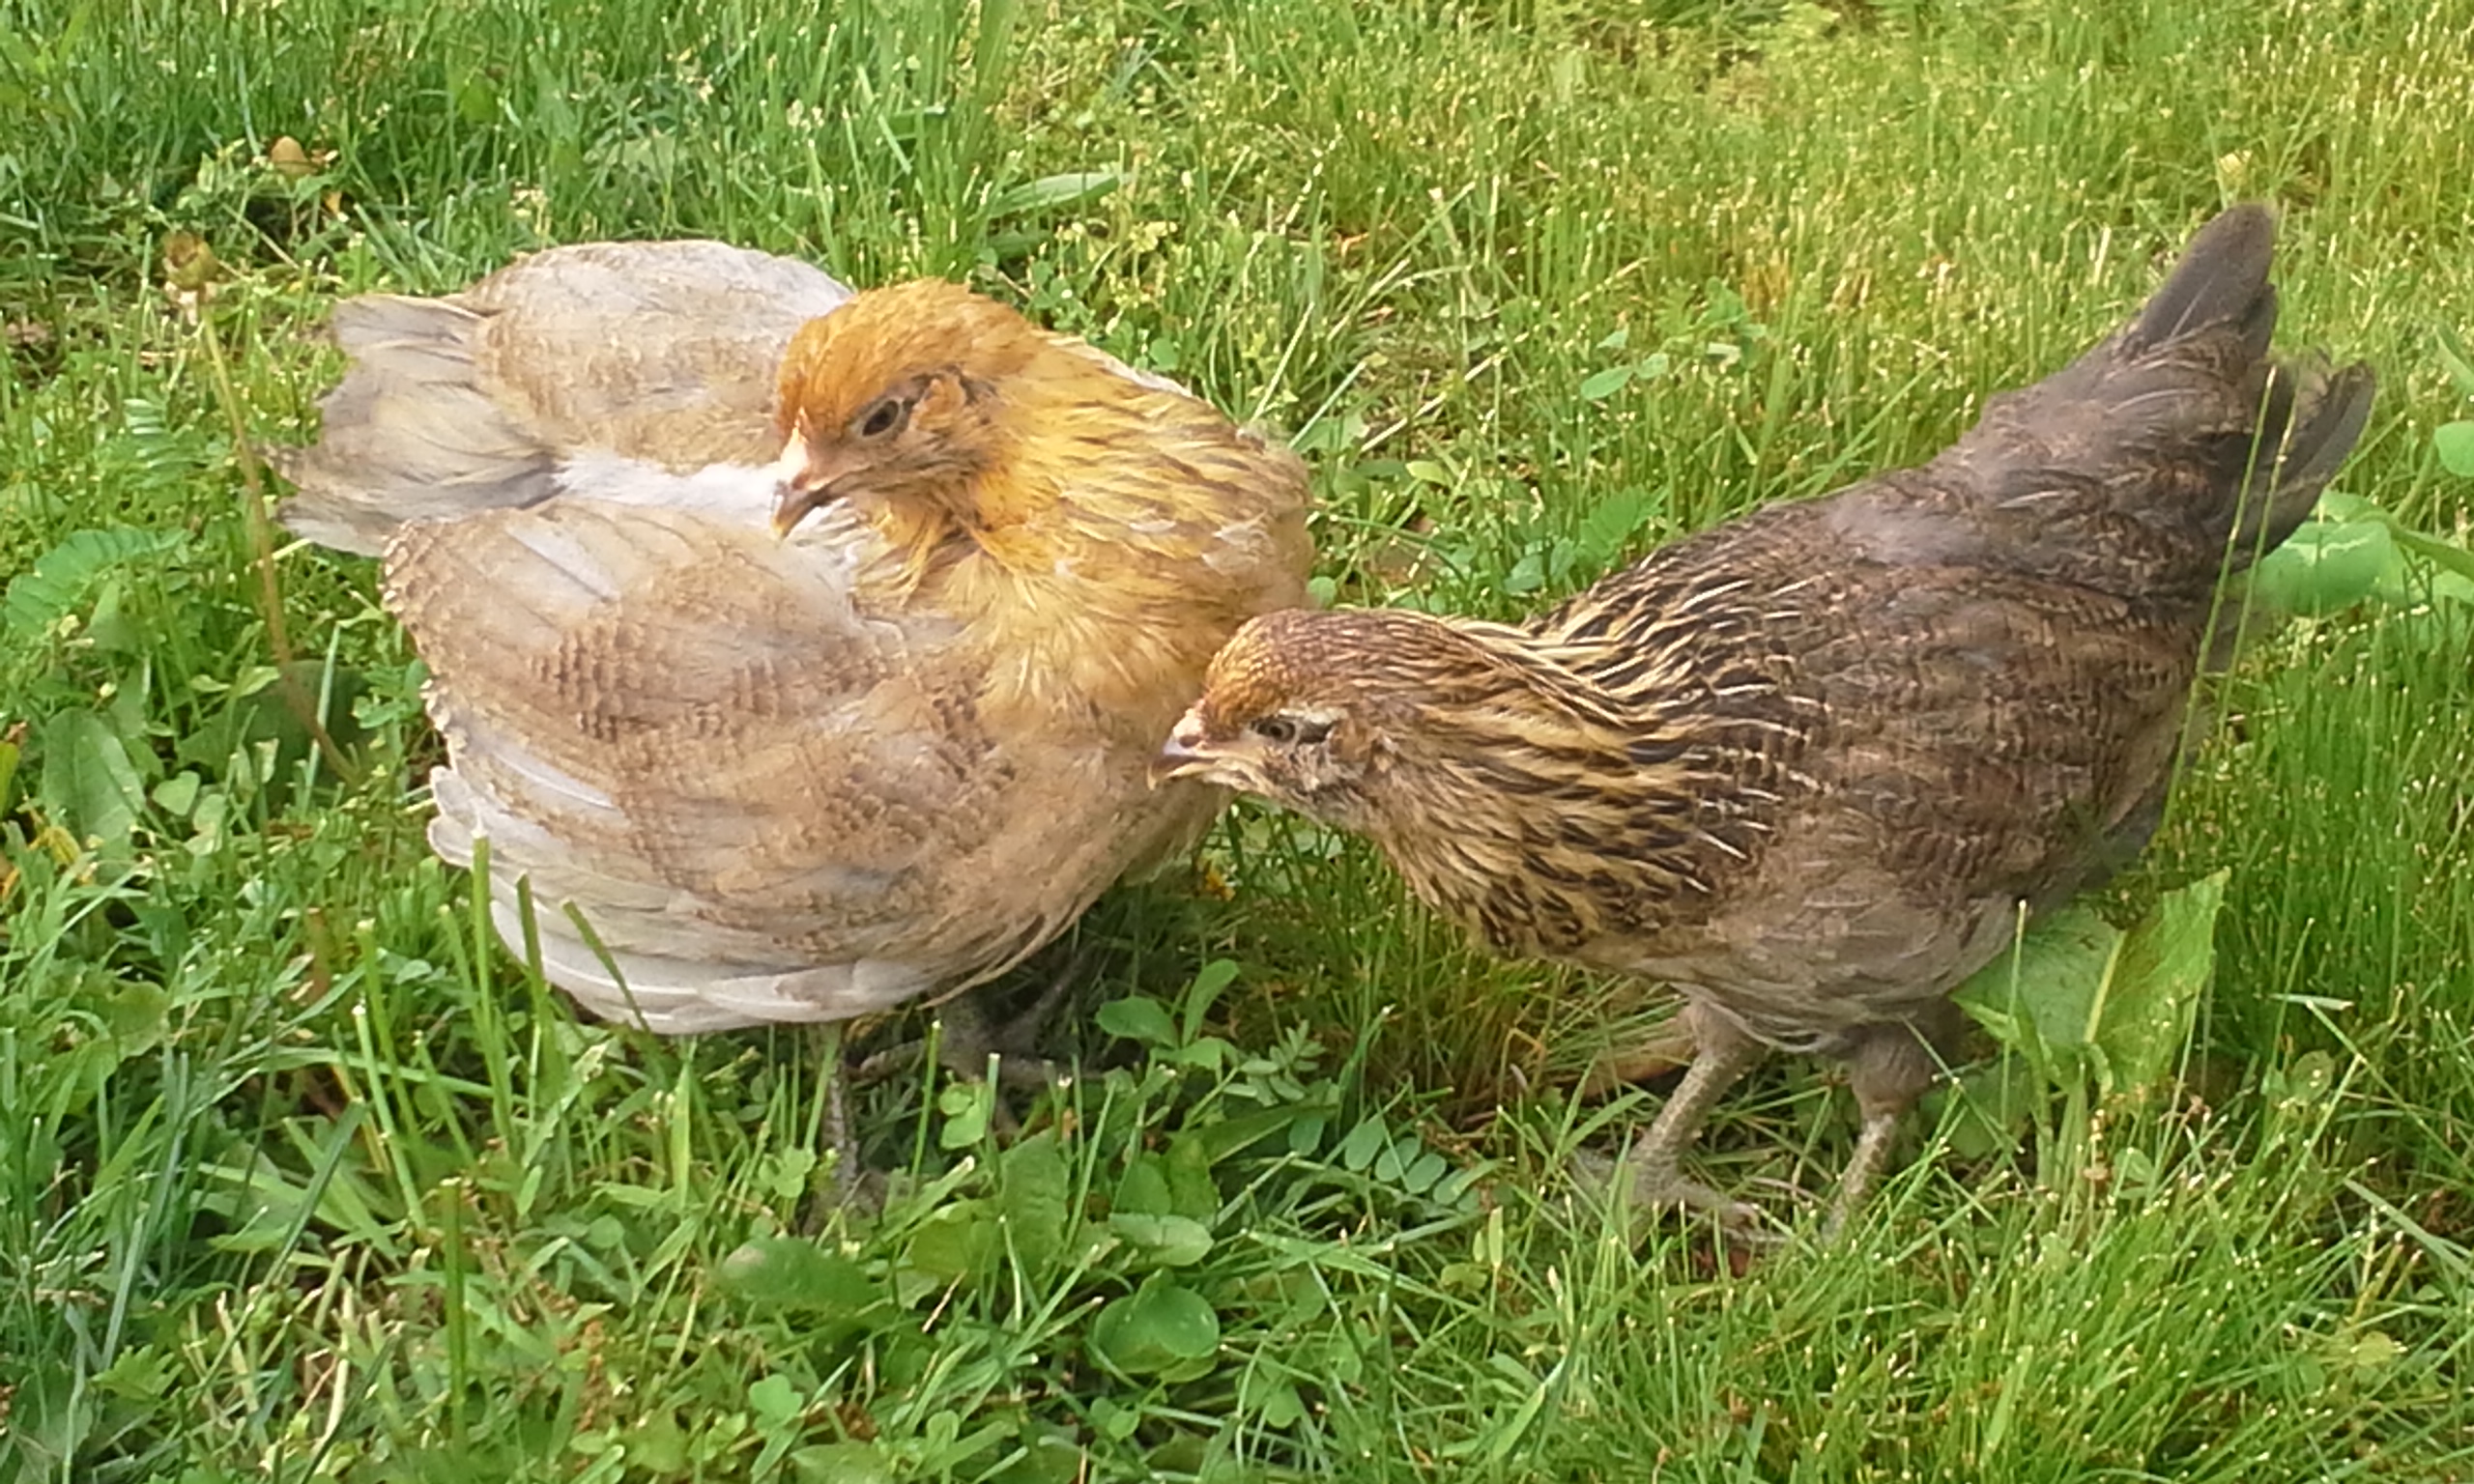 Goldie and Hawkgirl (until our daughter comes up with new names) growing up fast (5 weeks old)